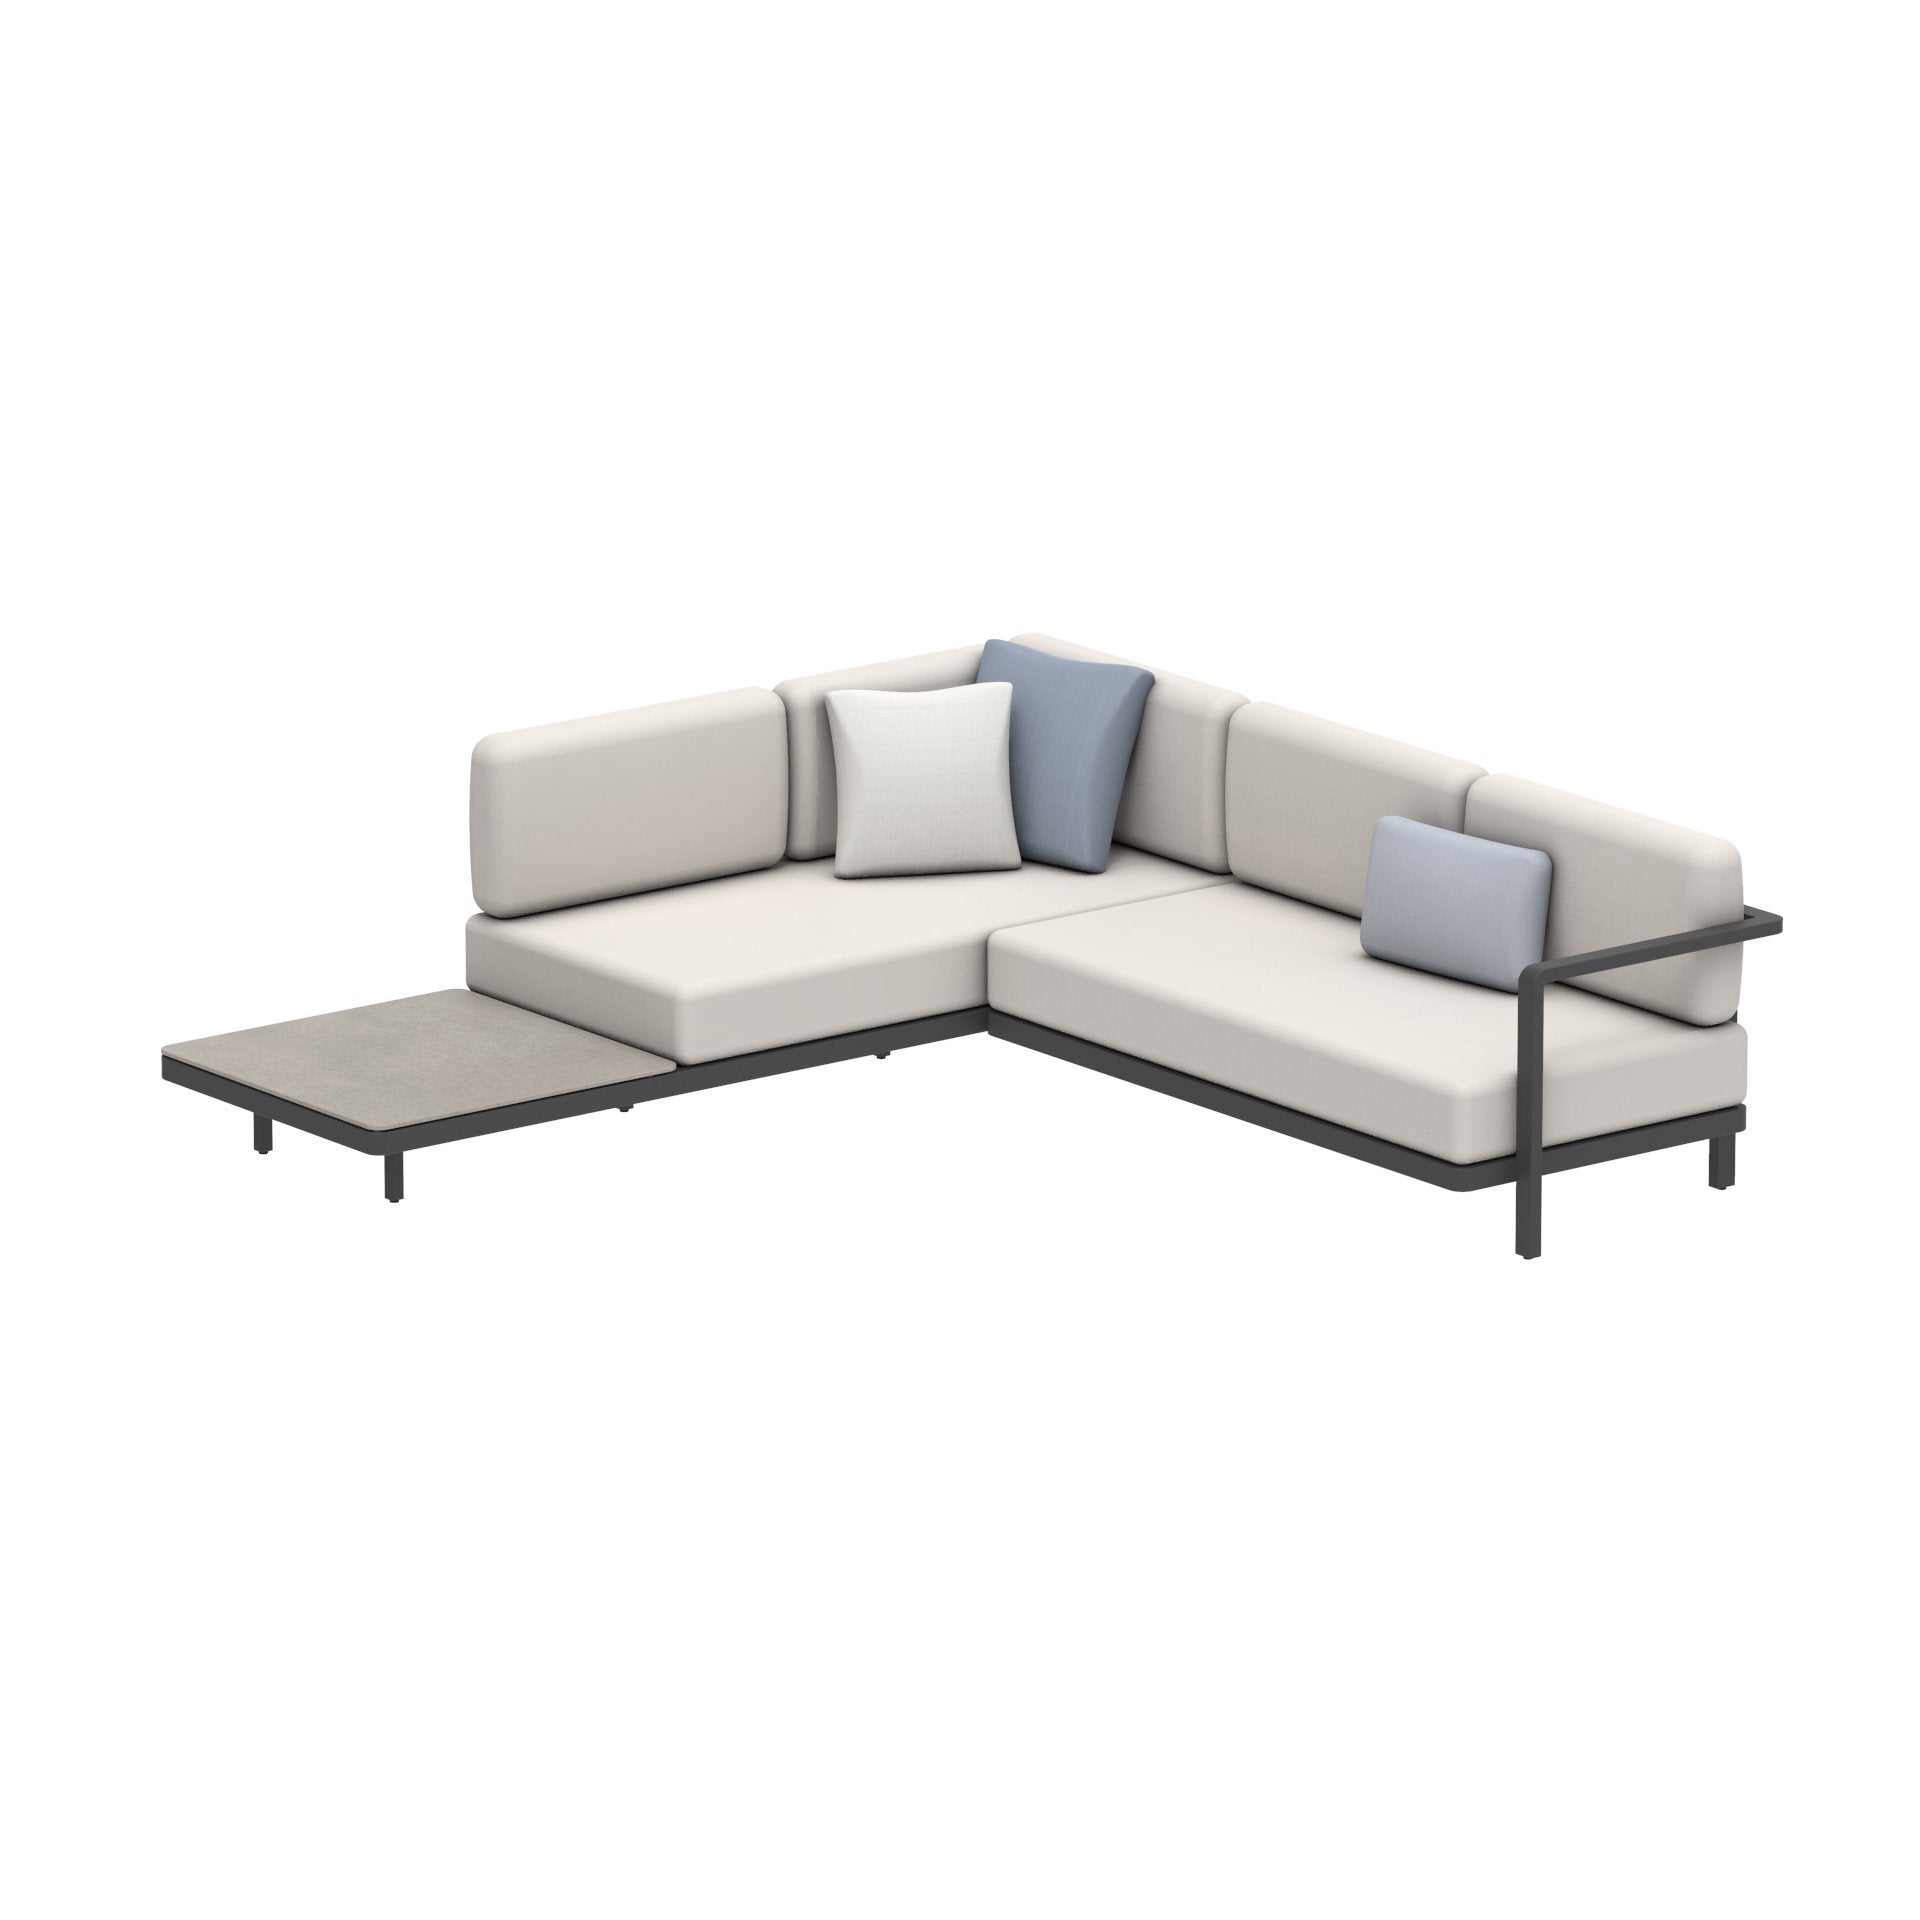 Alura Lounge Sofa Set Six D in anthracite